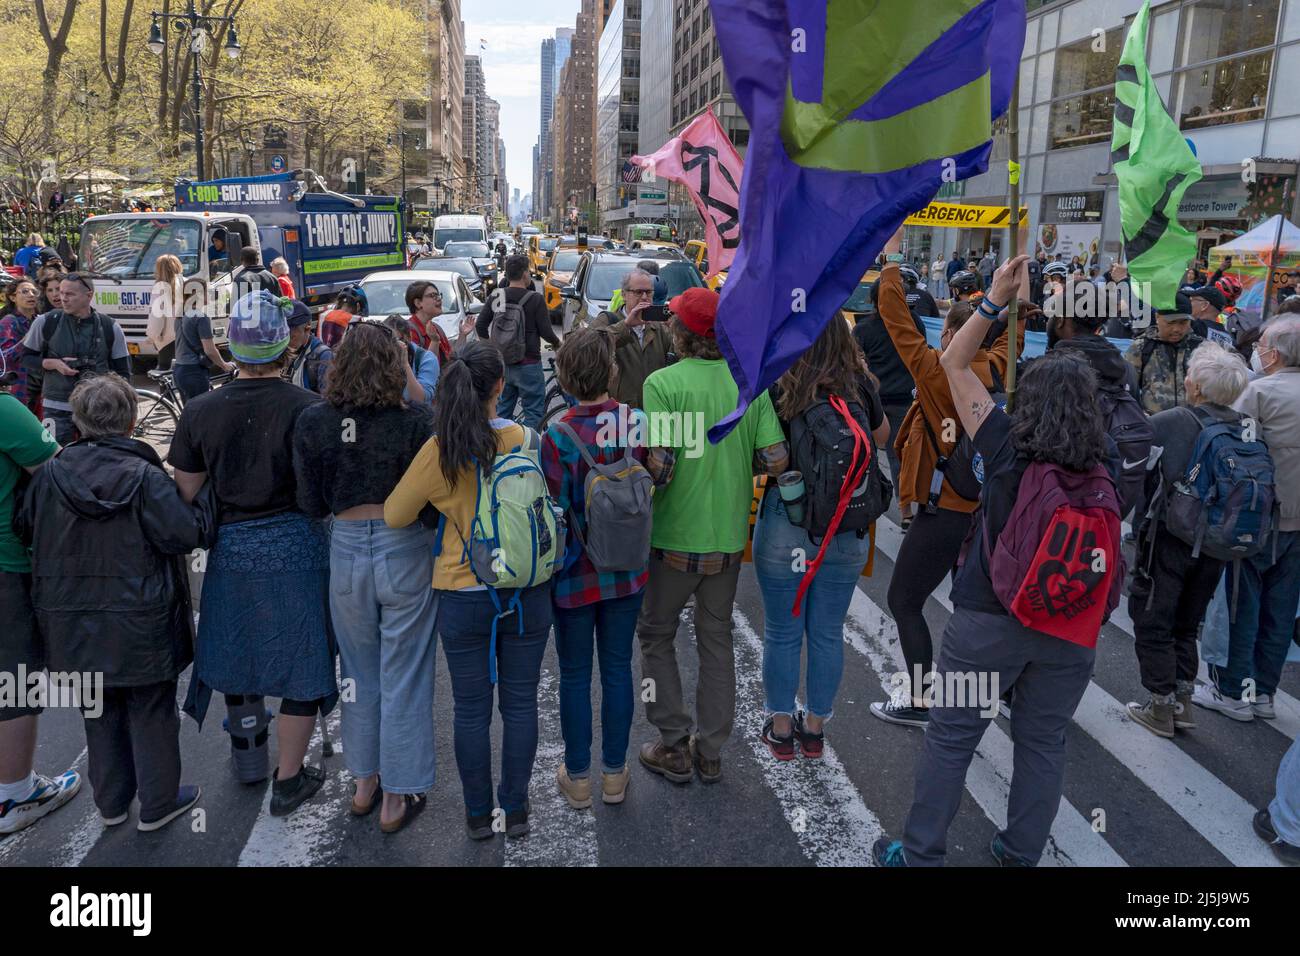 NEW YORK, NEW YORK - APRIL 23: Activists from Extinction Rebellion New York  City (XR-NYC) joined by marchers block traffic along 6th Avenue on April  23, 2022 in New York City. After